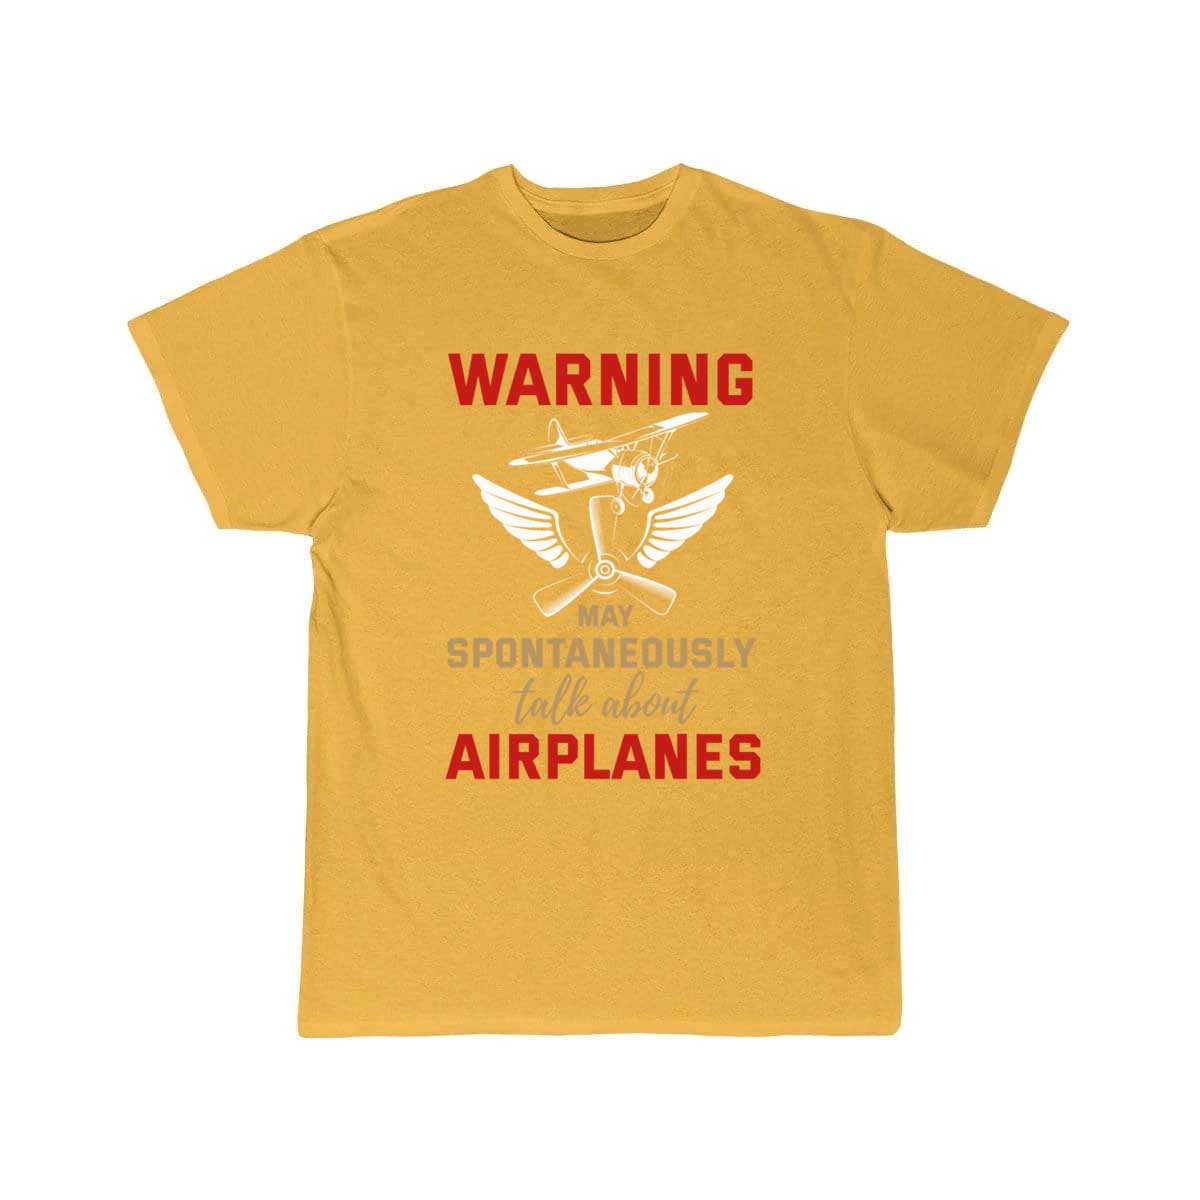 Pilot Airplane Plane Aircraft Aviation Helicopter T-SHIRT THE AV8R